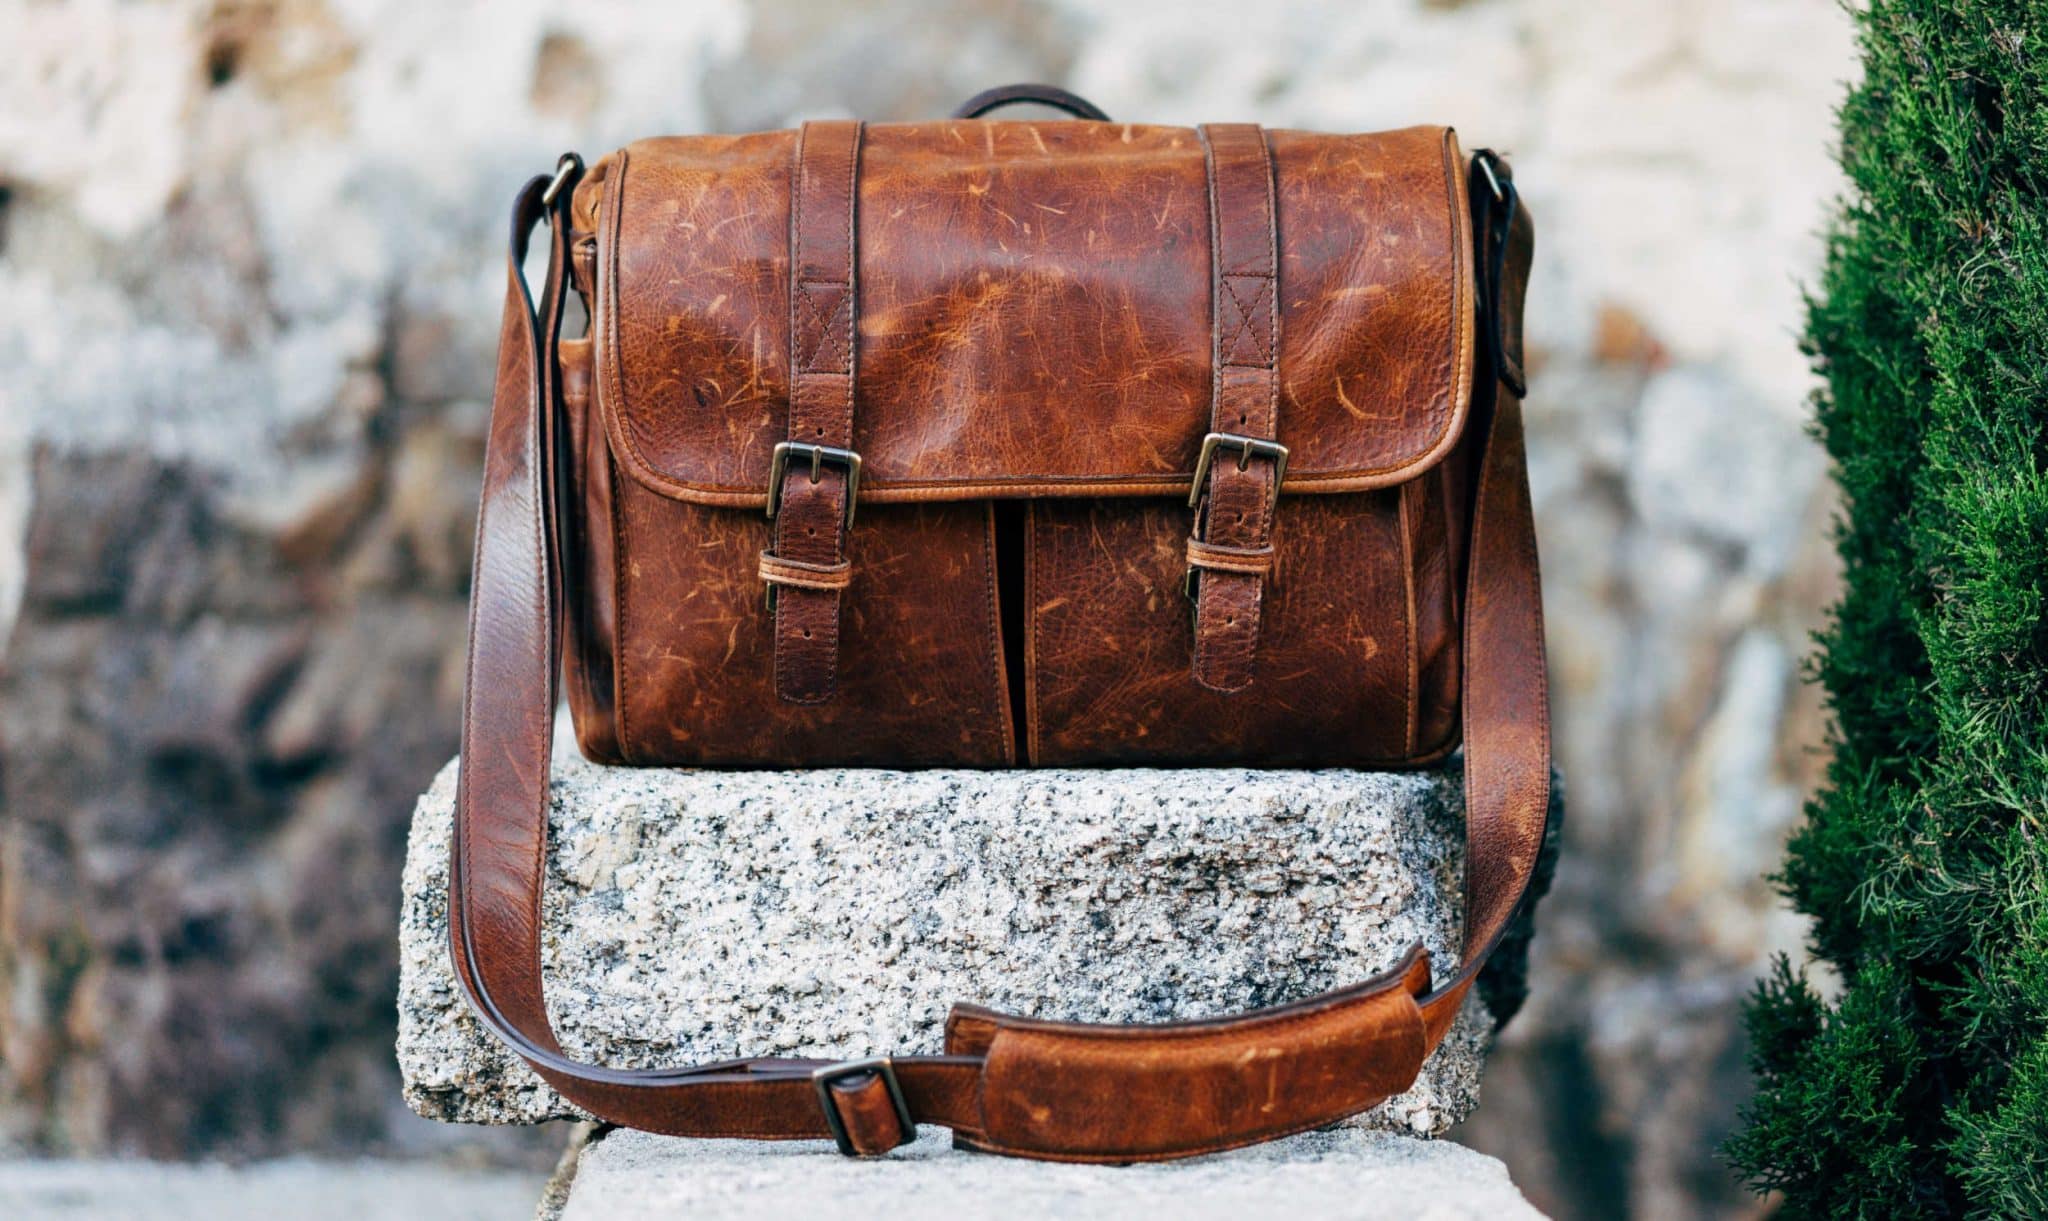 A satchel made from natural tanned leather